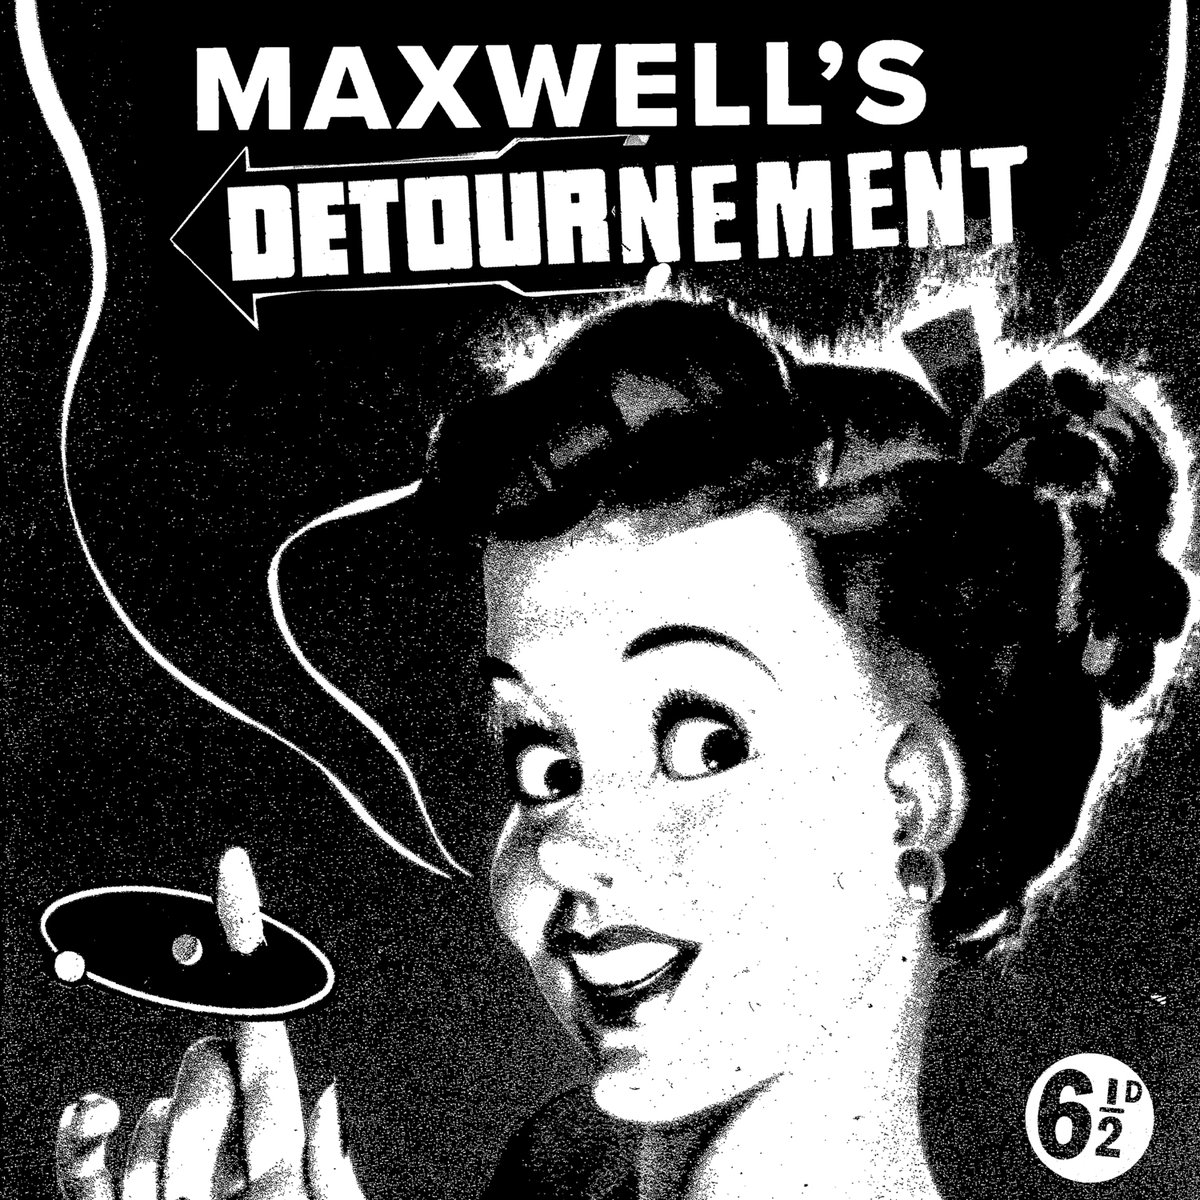 Maxwell’s Detournement - a 40-page collage-zine which randomly remixes the lyrics to The Beatles ‘worst’ song. PDF from slimsmith.com/maxwells-detou…

#pataphysics #surrealism #dada #zines #collagezines @surrealerpool #collage #alfredjarry